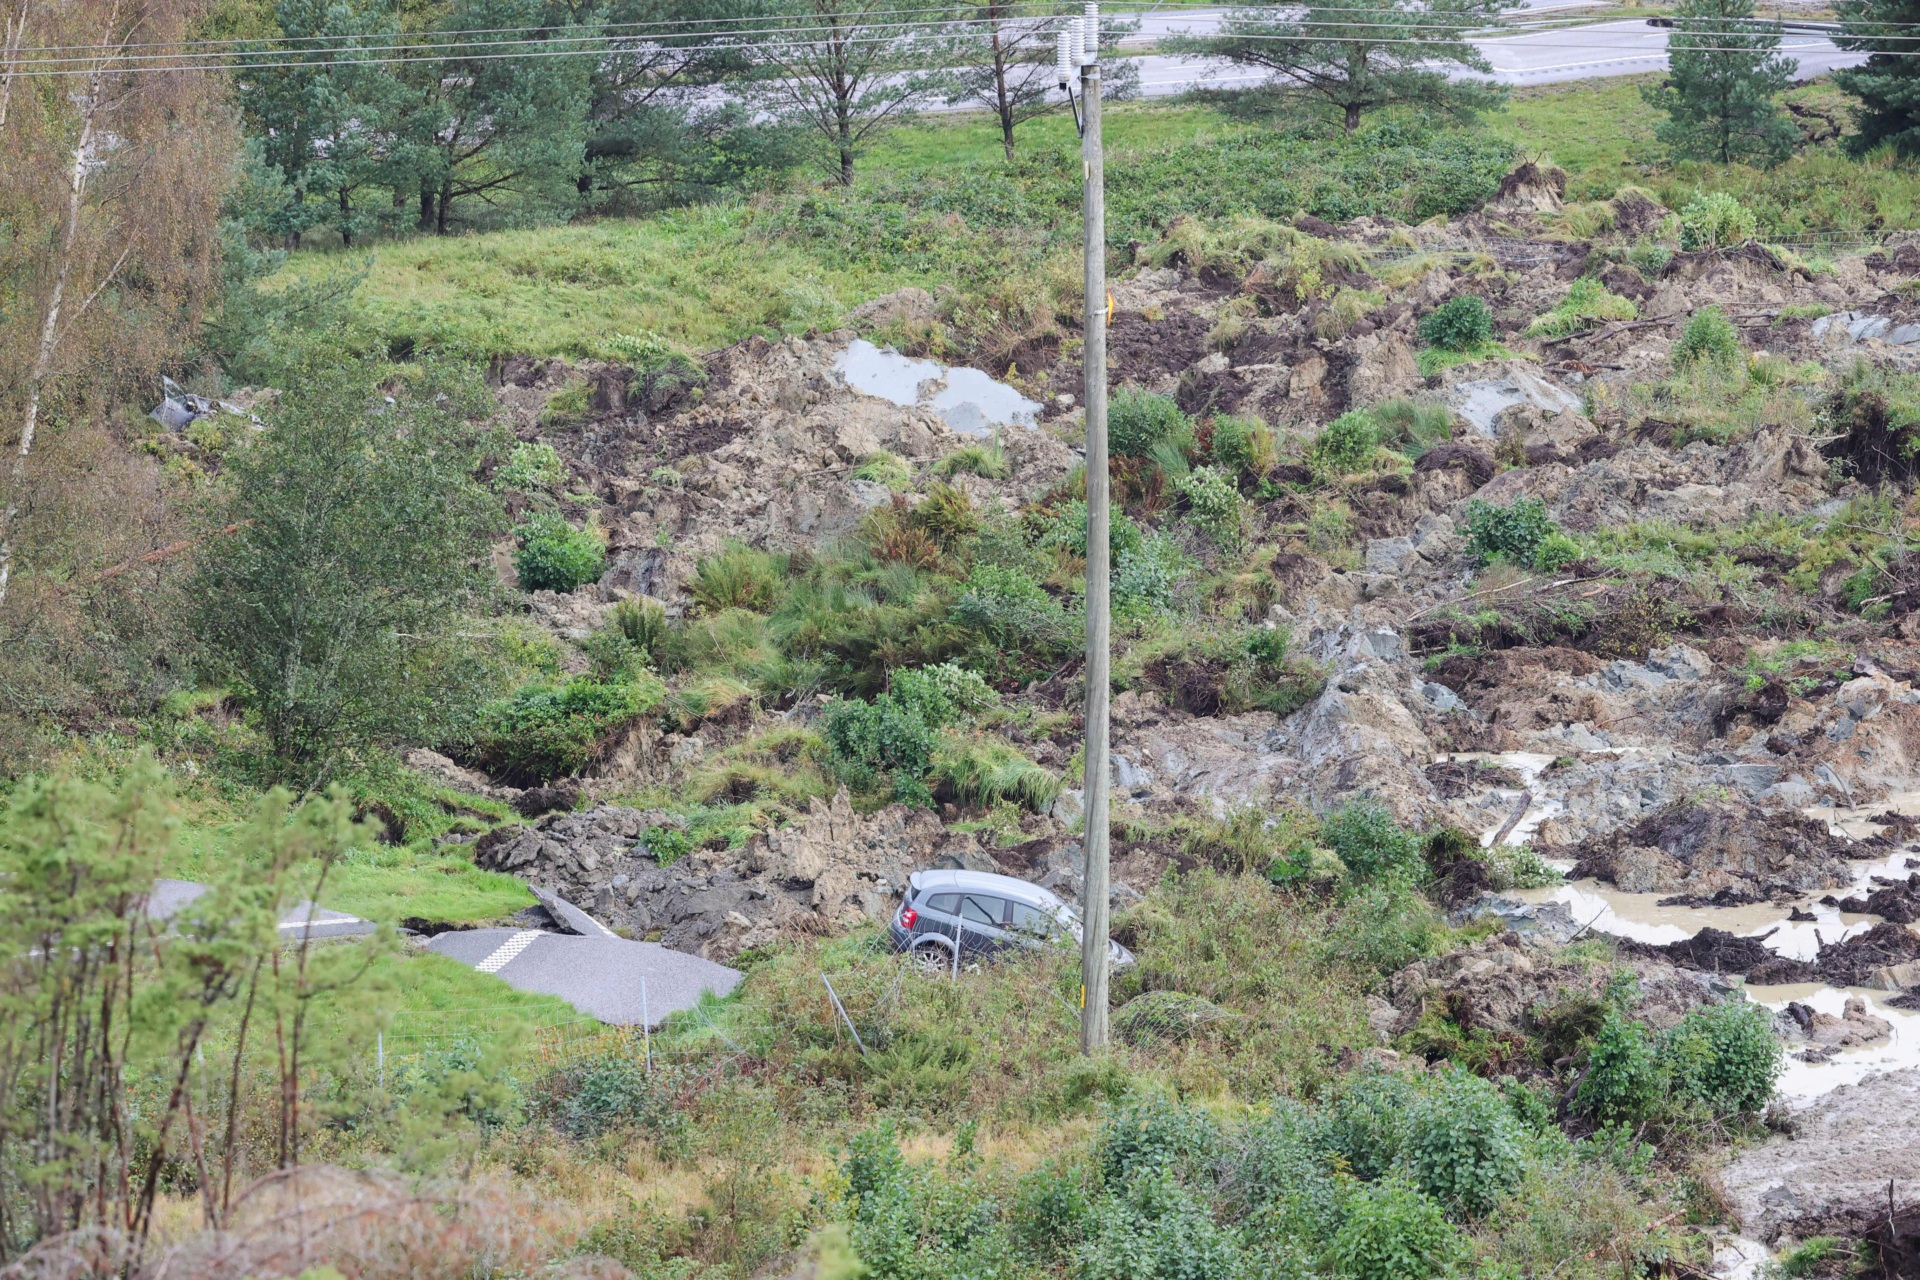 A car is seen in the debris of a street near Stenungsund, Sweden, on September 23, 2023. The E6 highway near Stenungsund was closed in both directions after persistent rain had caused a large landslide where several cars and a buses went down. Three people were said to be injured. (Photo by Adam IHSE / TT News Agency / AFP) / Sweden OUT (Photo by ADAM IHSE/TT News Agency/AFP via Getty Images)